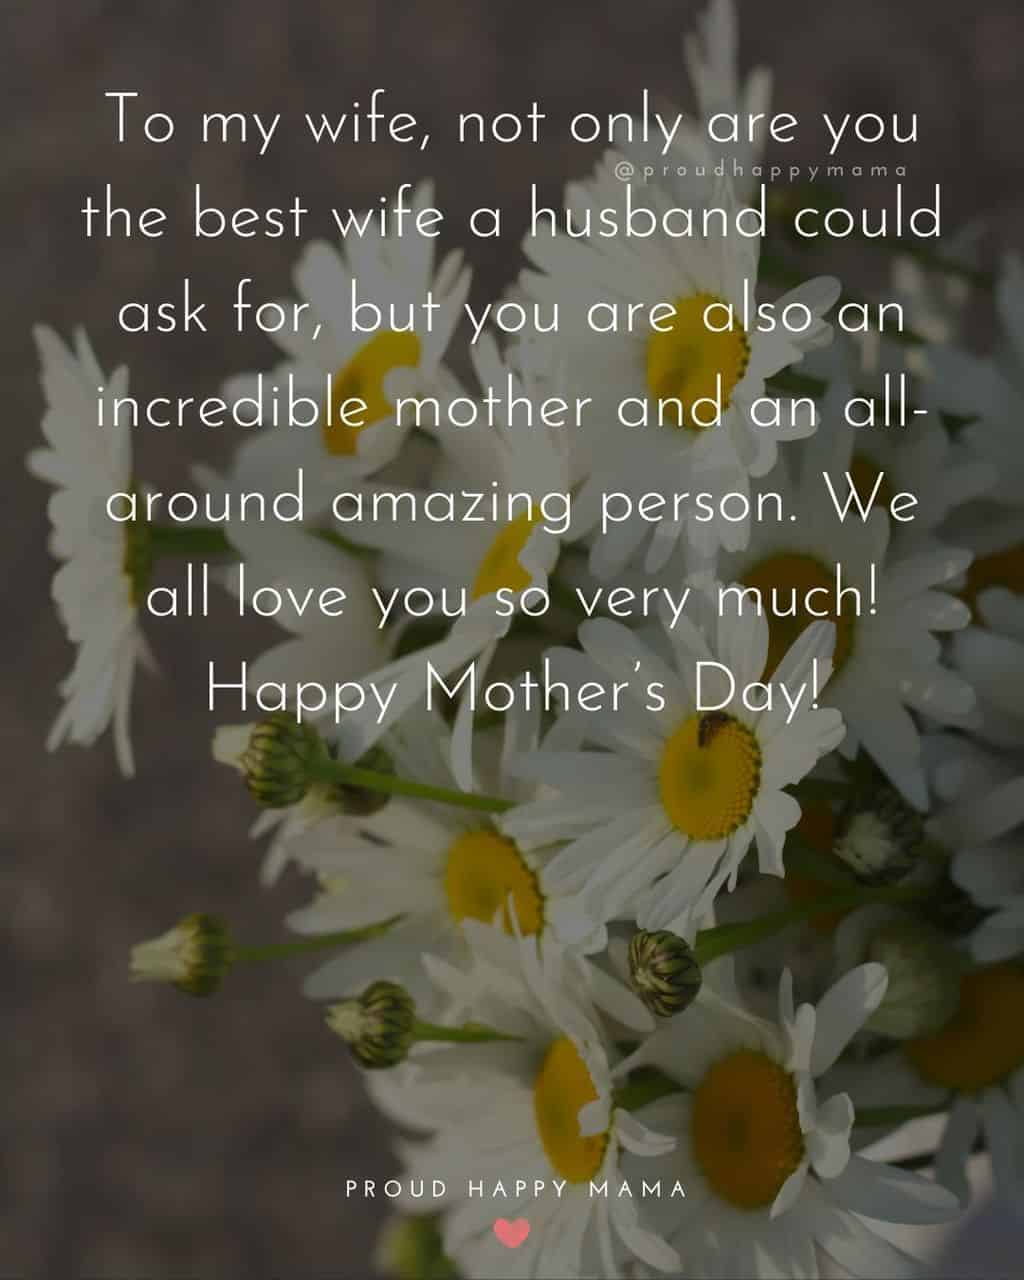 Happy Mothers Day Quotes For Wife - To my wife, not only are you the best wife a husband could ask for, but you are also an